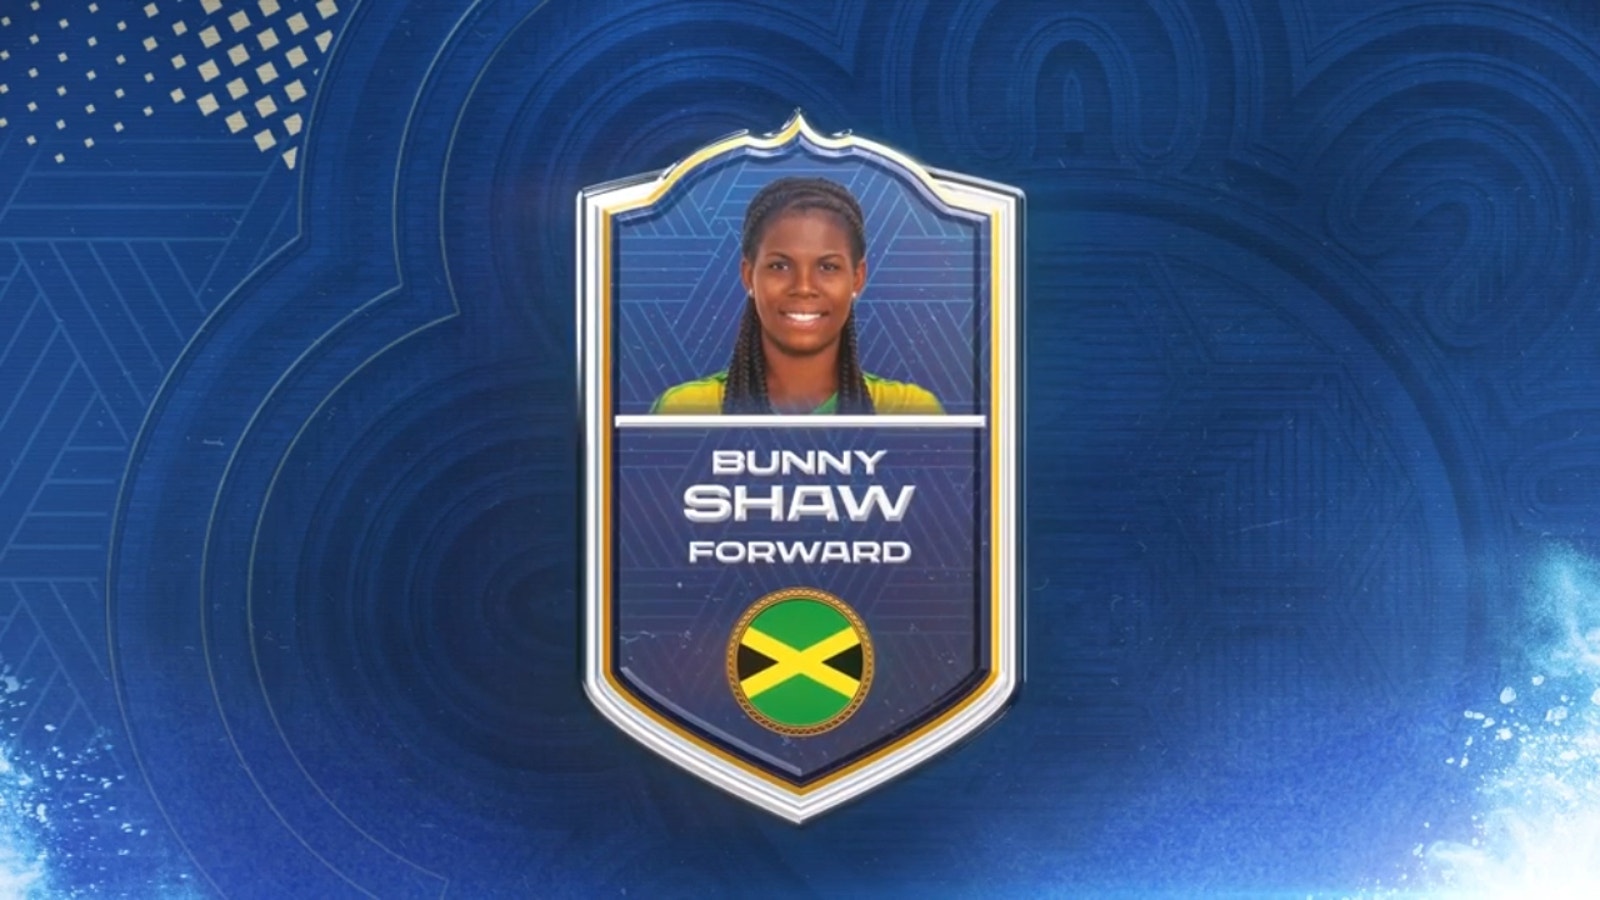 Jamaica's Bunny Shaw: No. 16 | Aly Wagner's Top 25 Players in the 2023 Women's World Cup